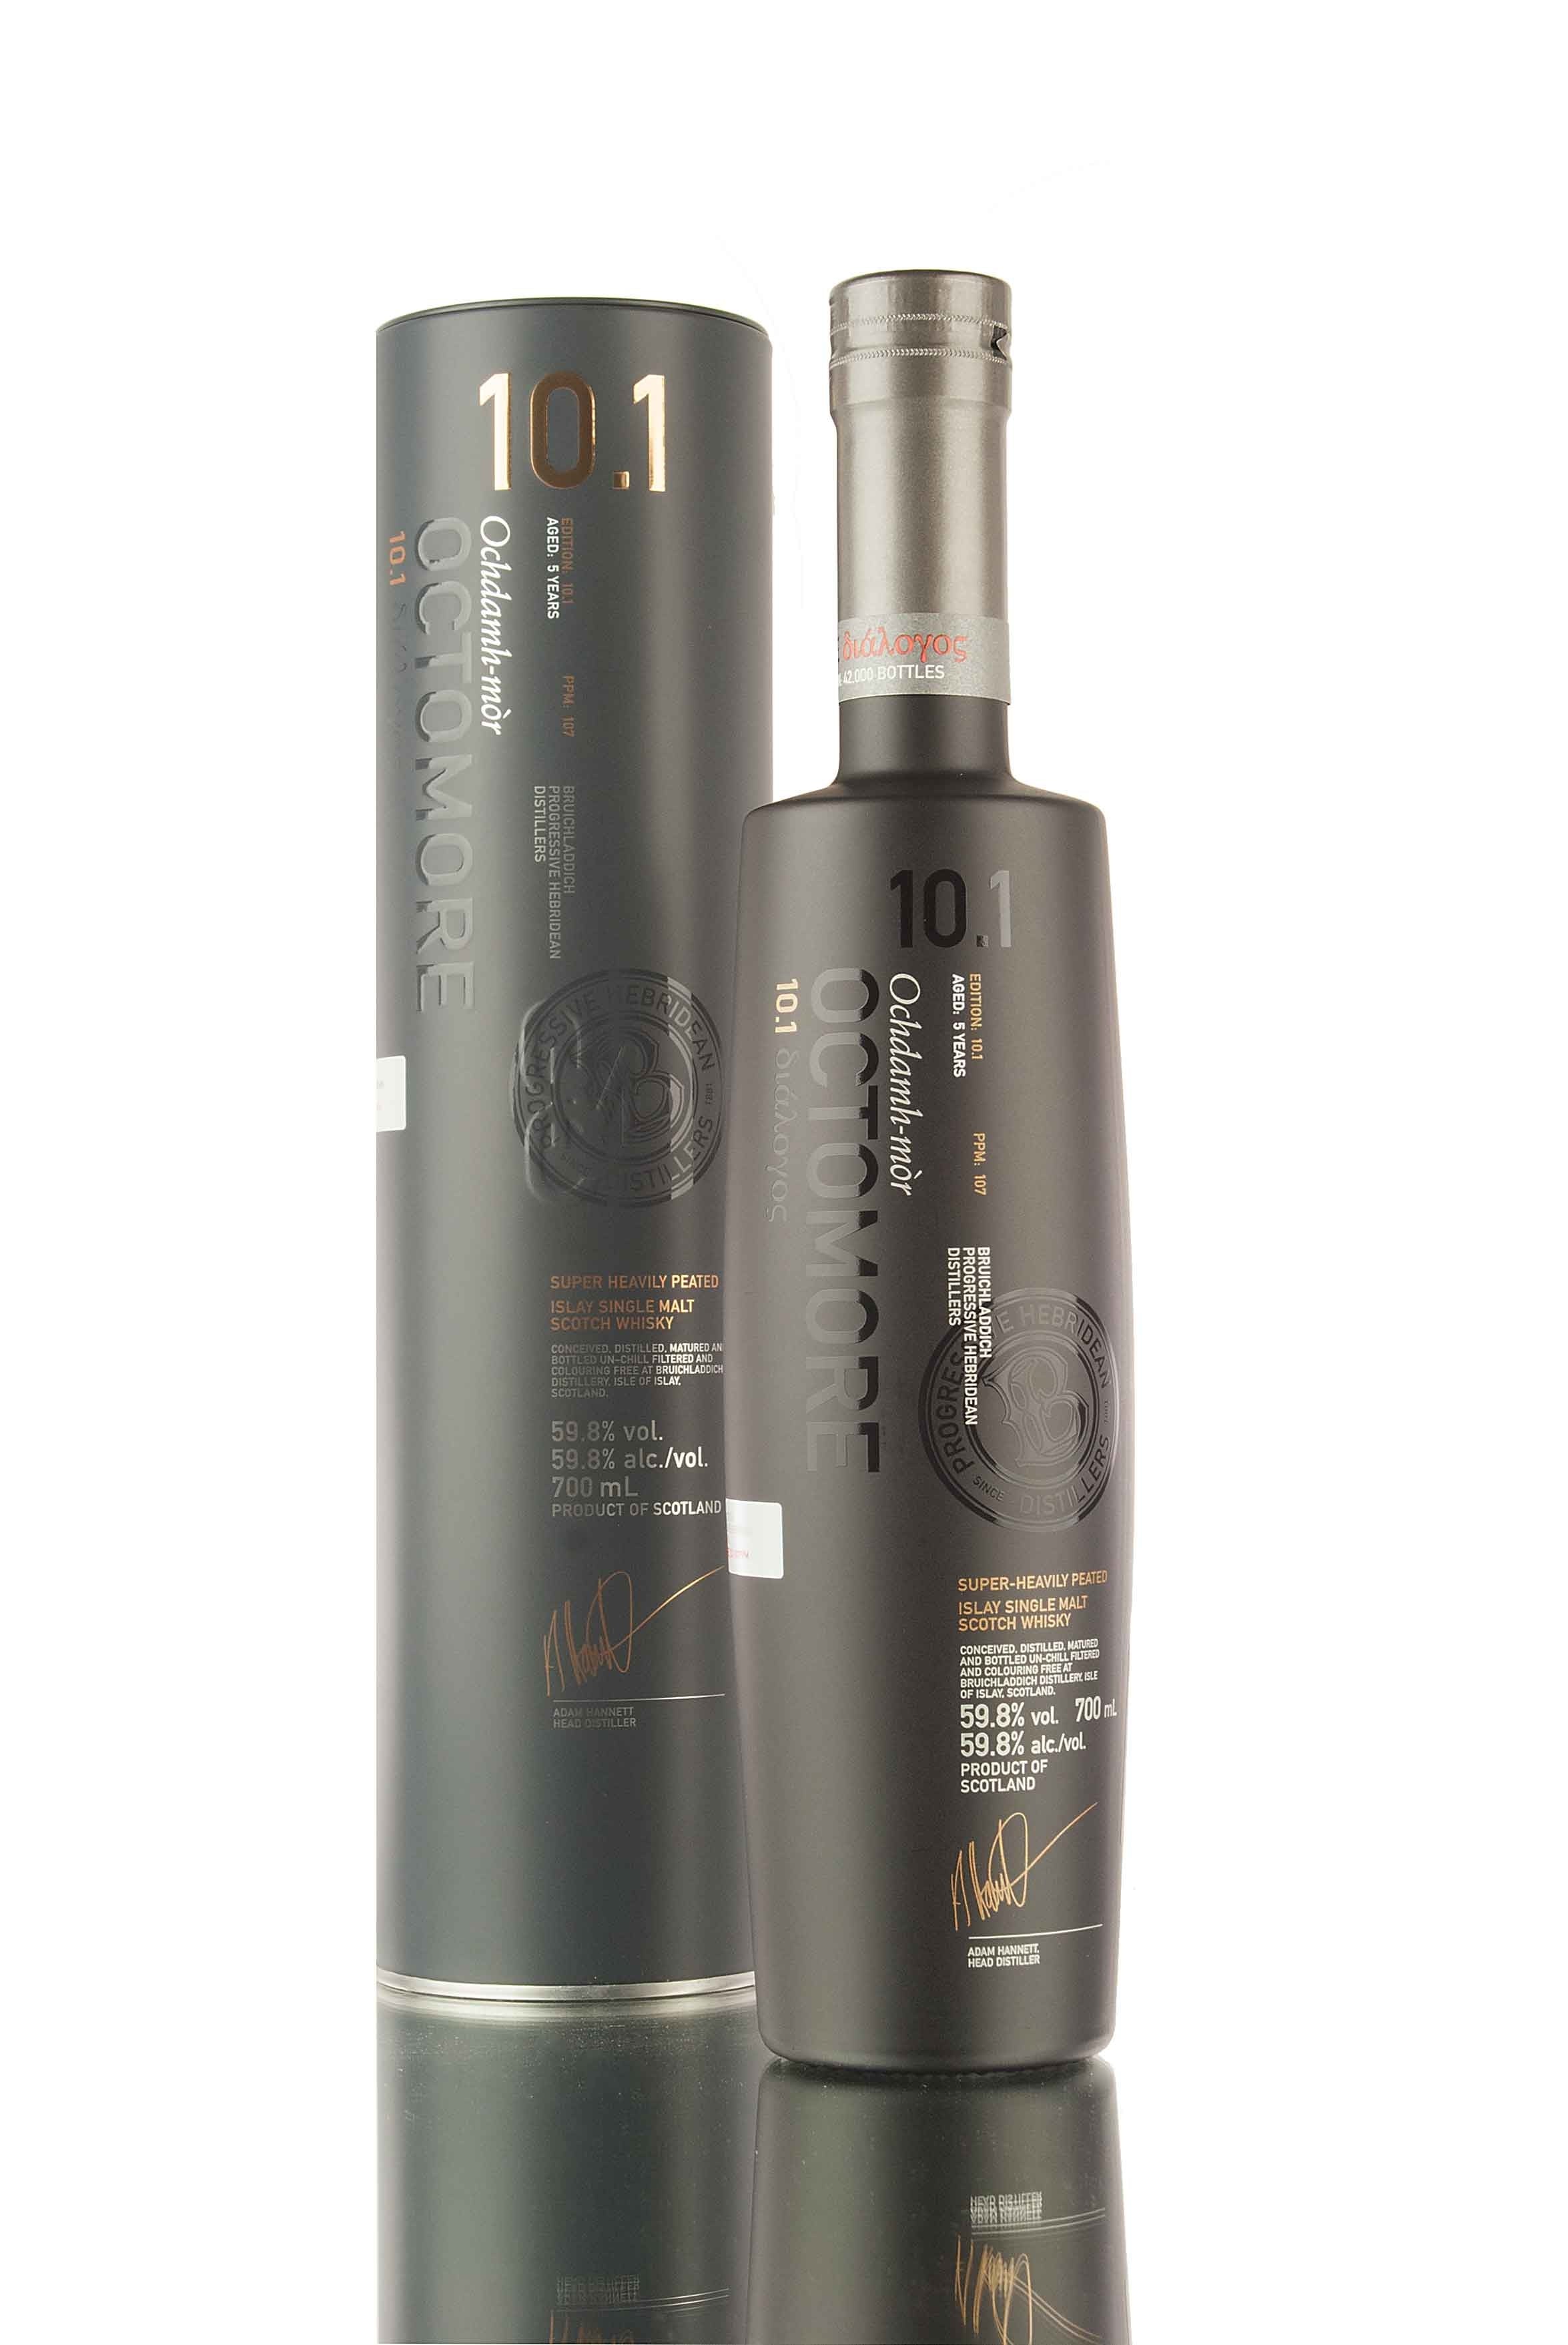 Octomore 10.1 | 5 Year Old - 2013